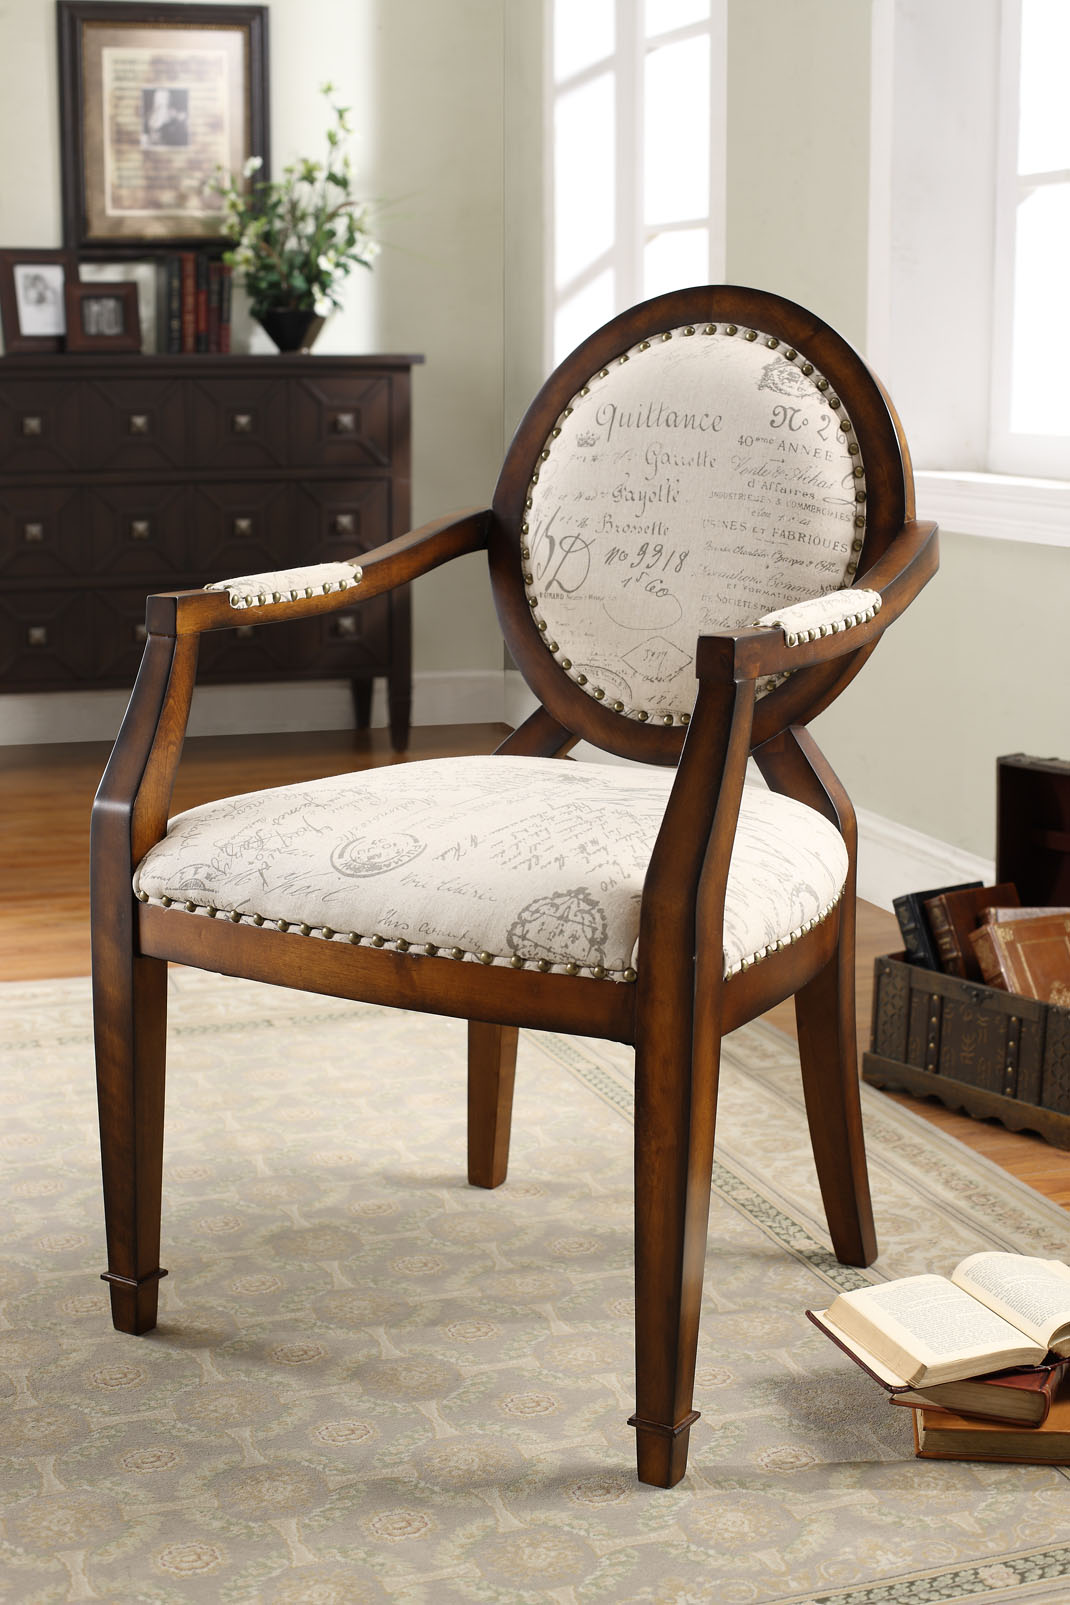 Amazing Antique Wooden Chair Designs for Timeless Elegance ...